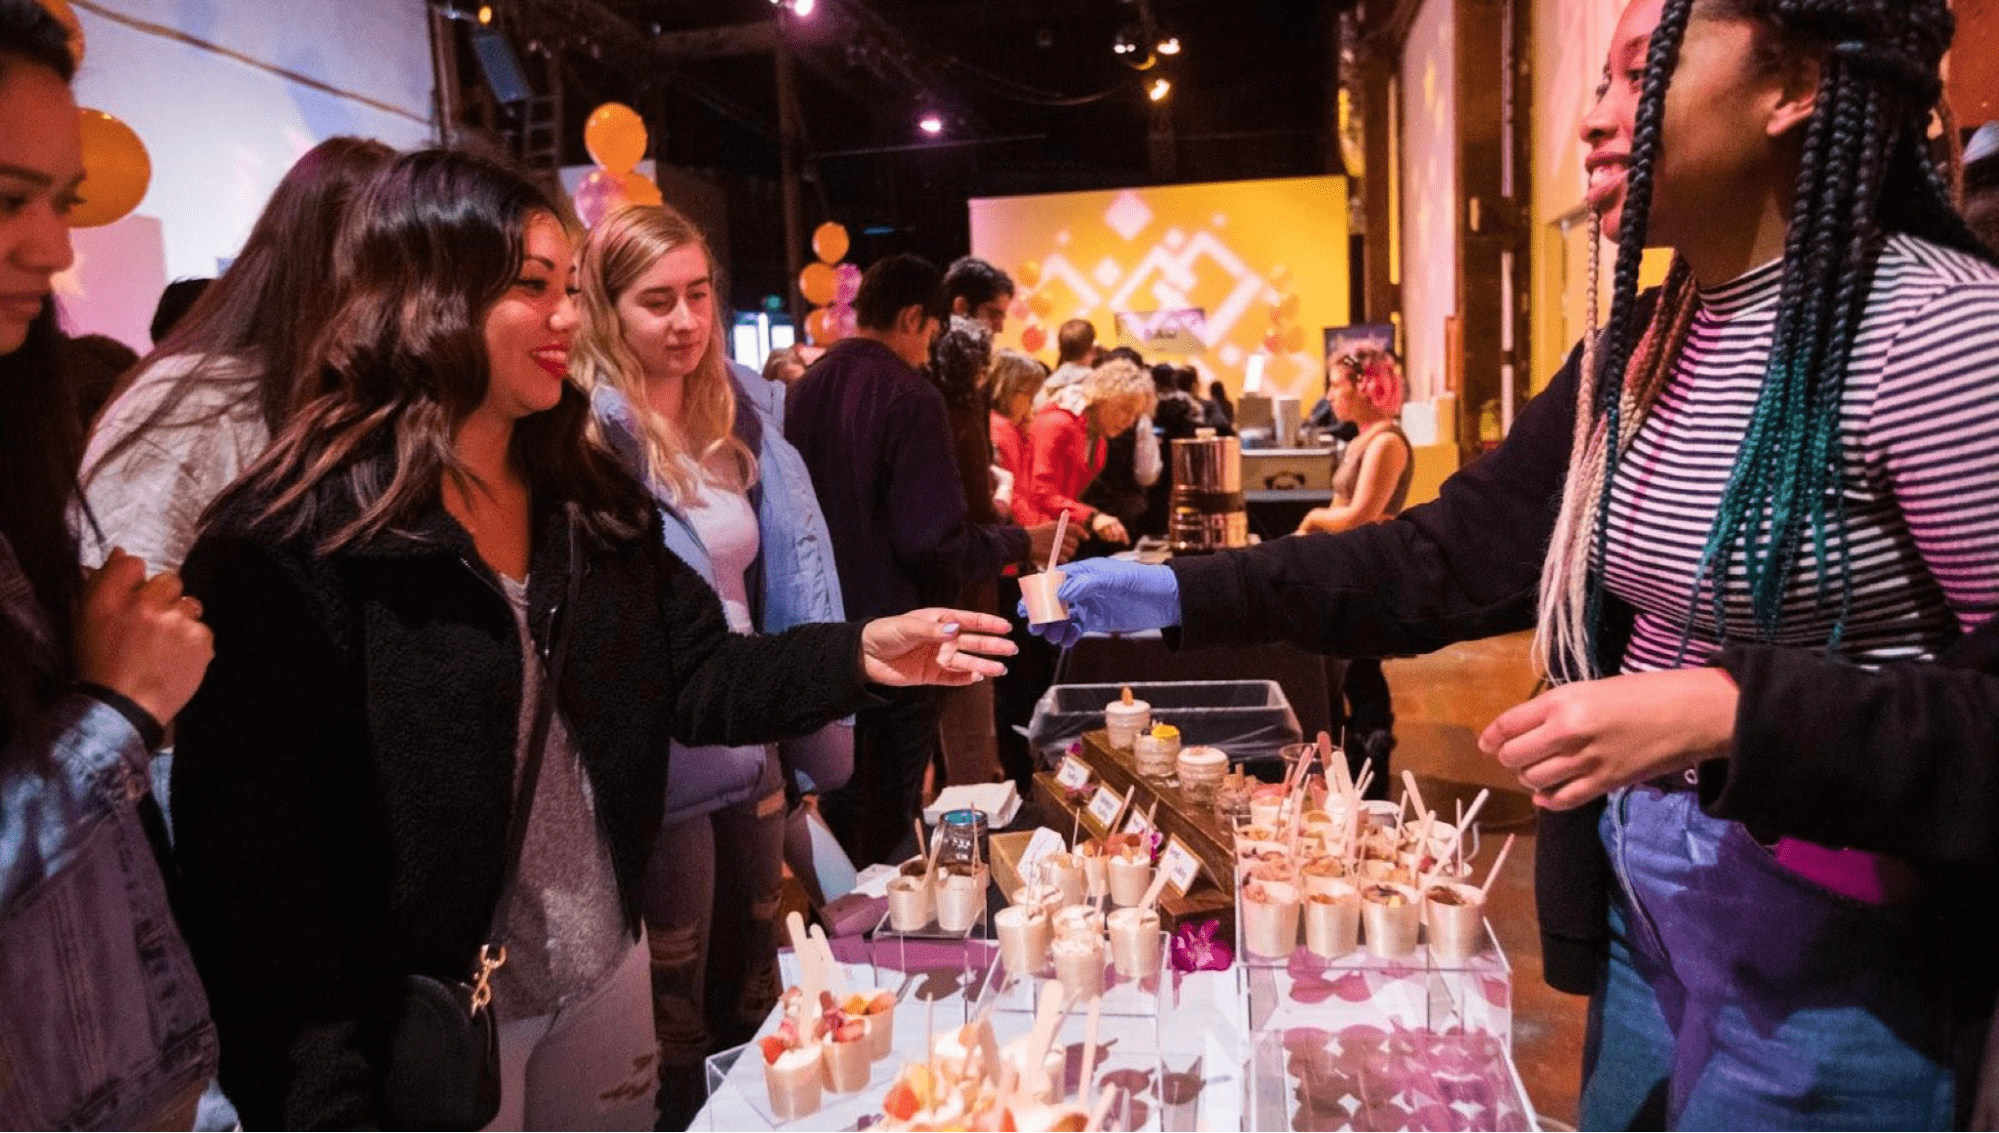 Vendor giving guest food at an experiential marketing event